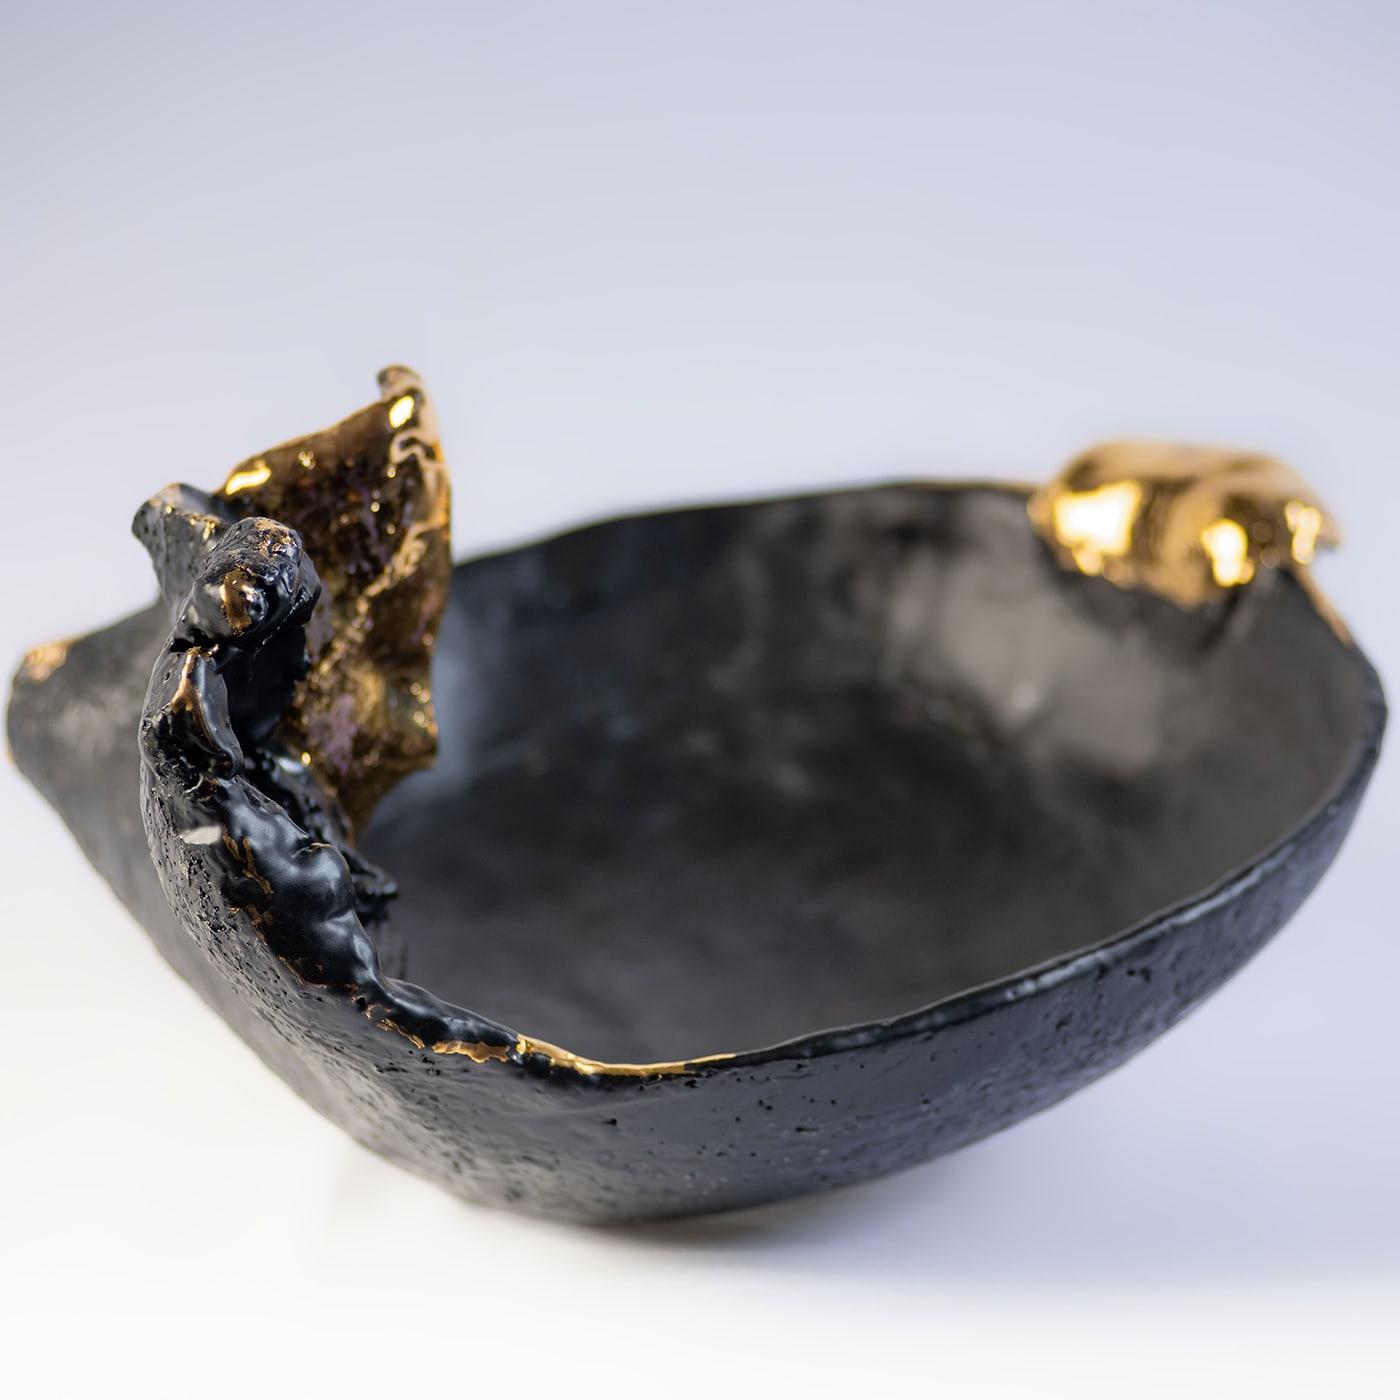 A figure seemingly trying to detach from darkness to reach the light is the outstanding trait lending this centerpiece bowl its poetic allure. Glazed in matte-black, it is luxuriously accented with polished gold inserts that emphasize the